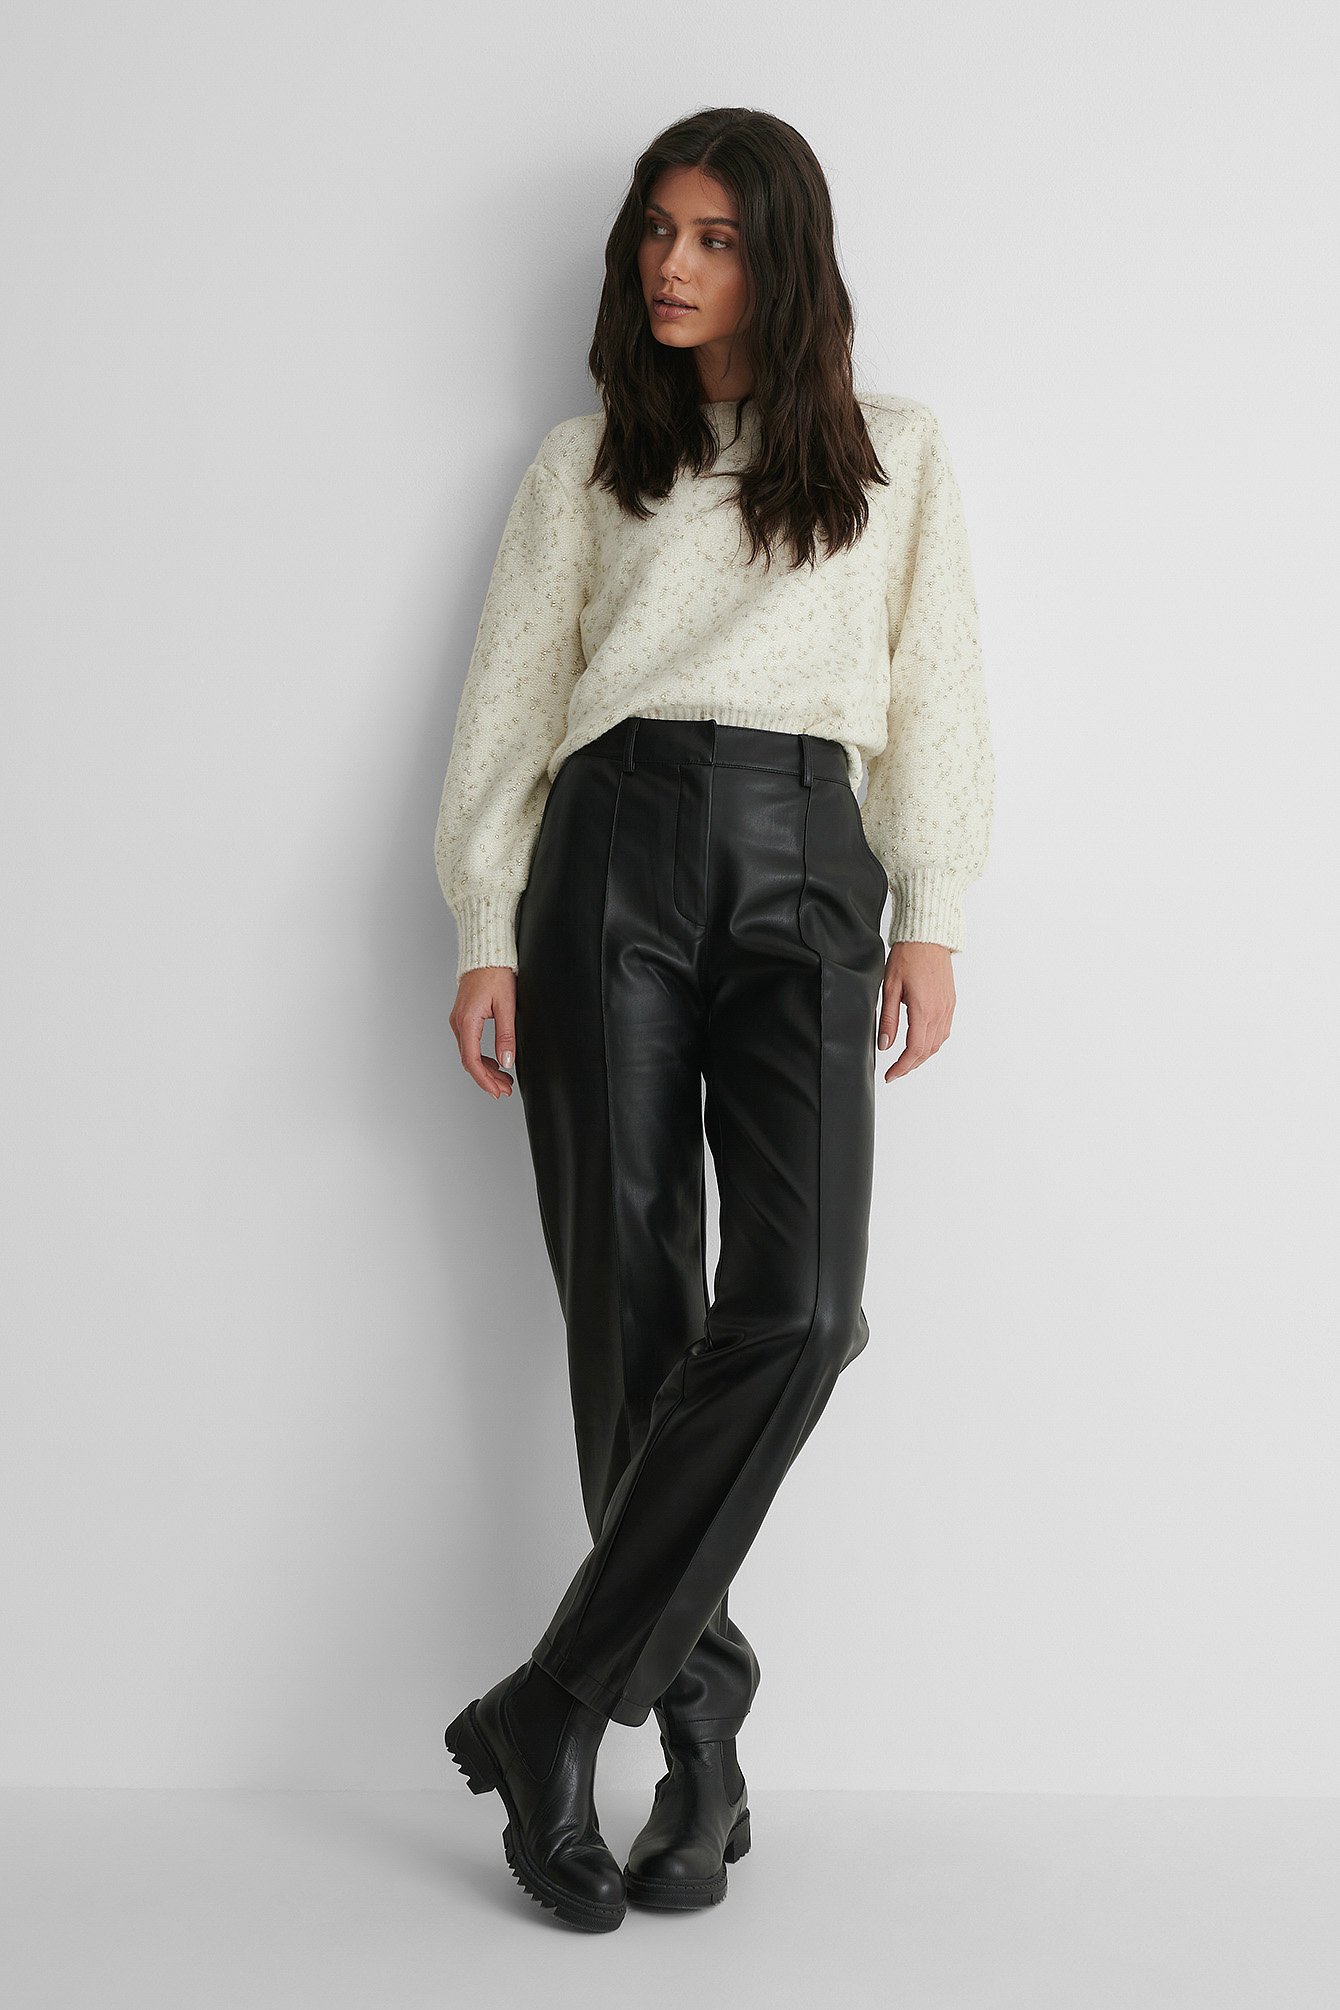 Mango Quilate Sweater with PU Pants and Boots.